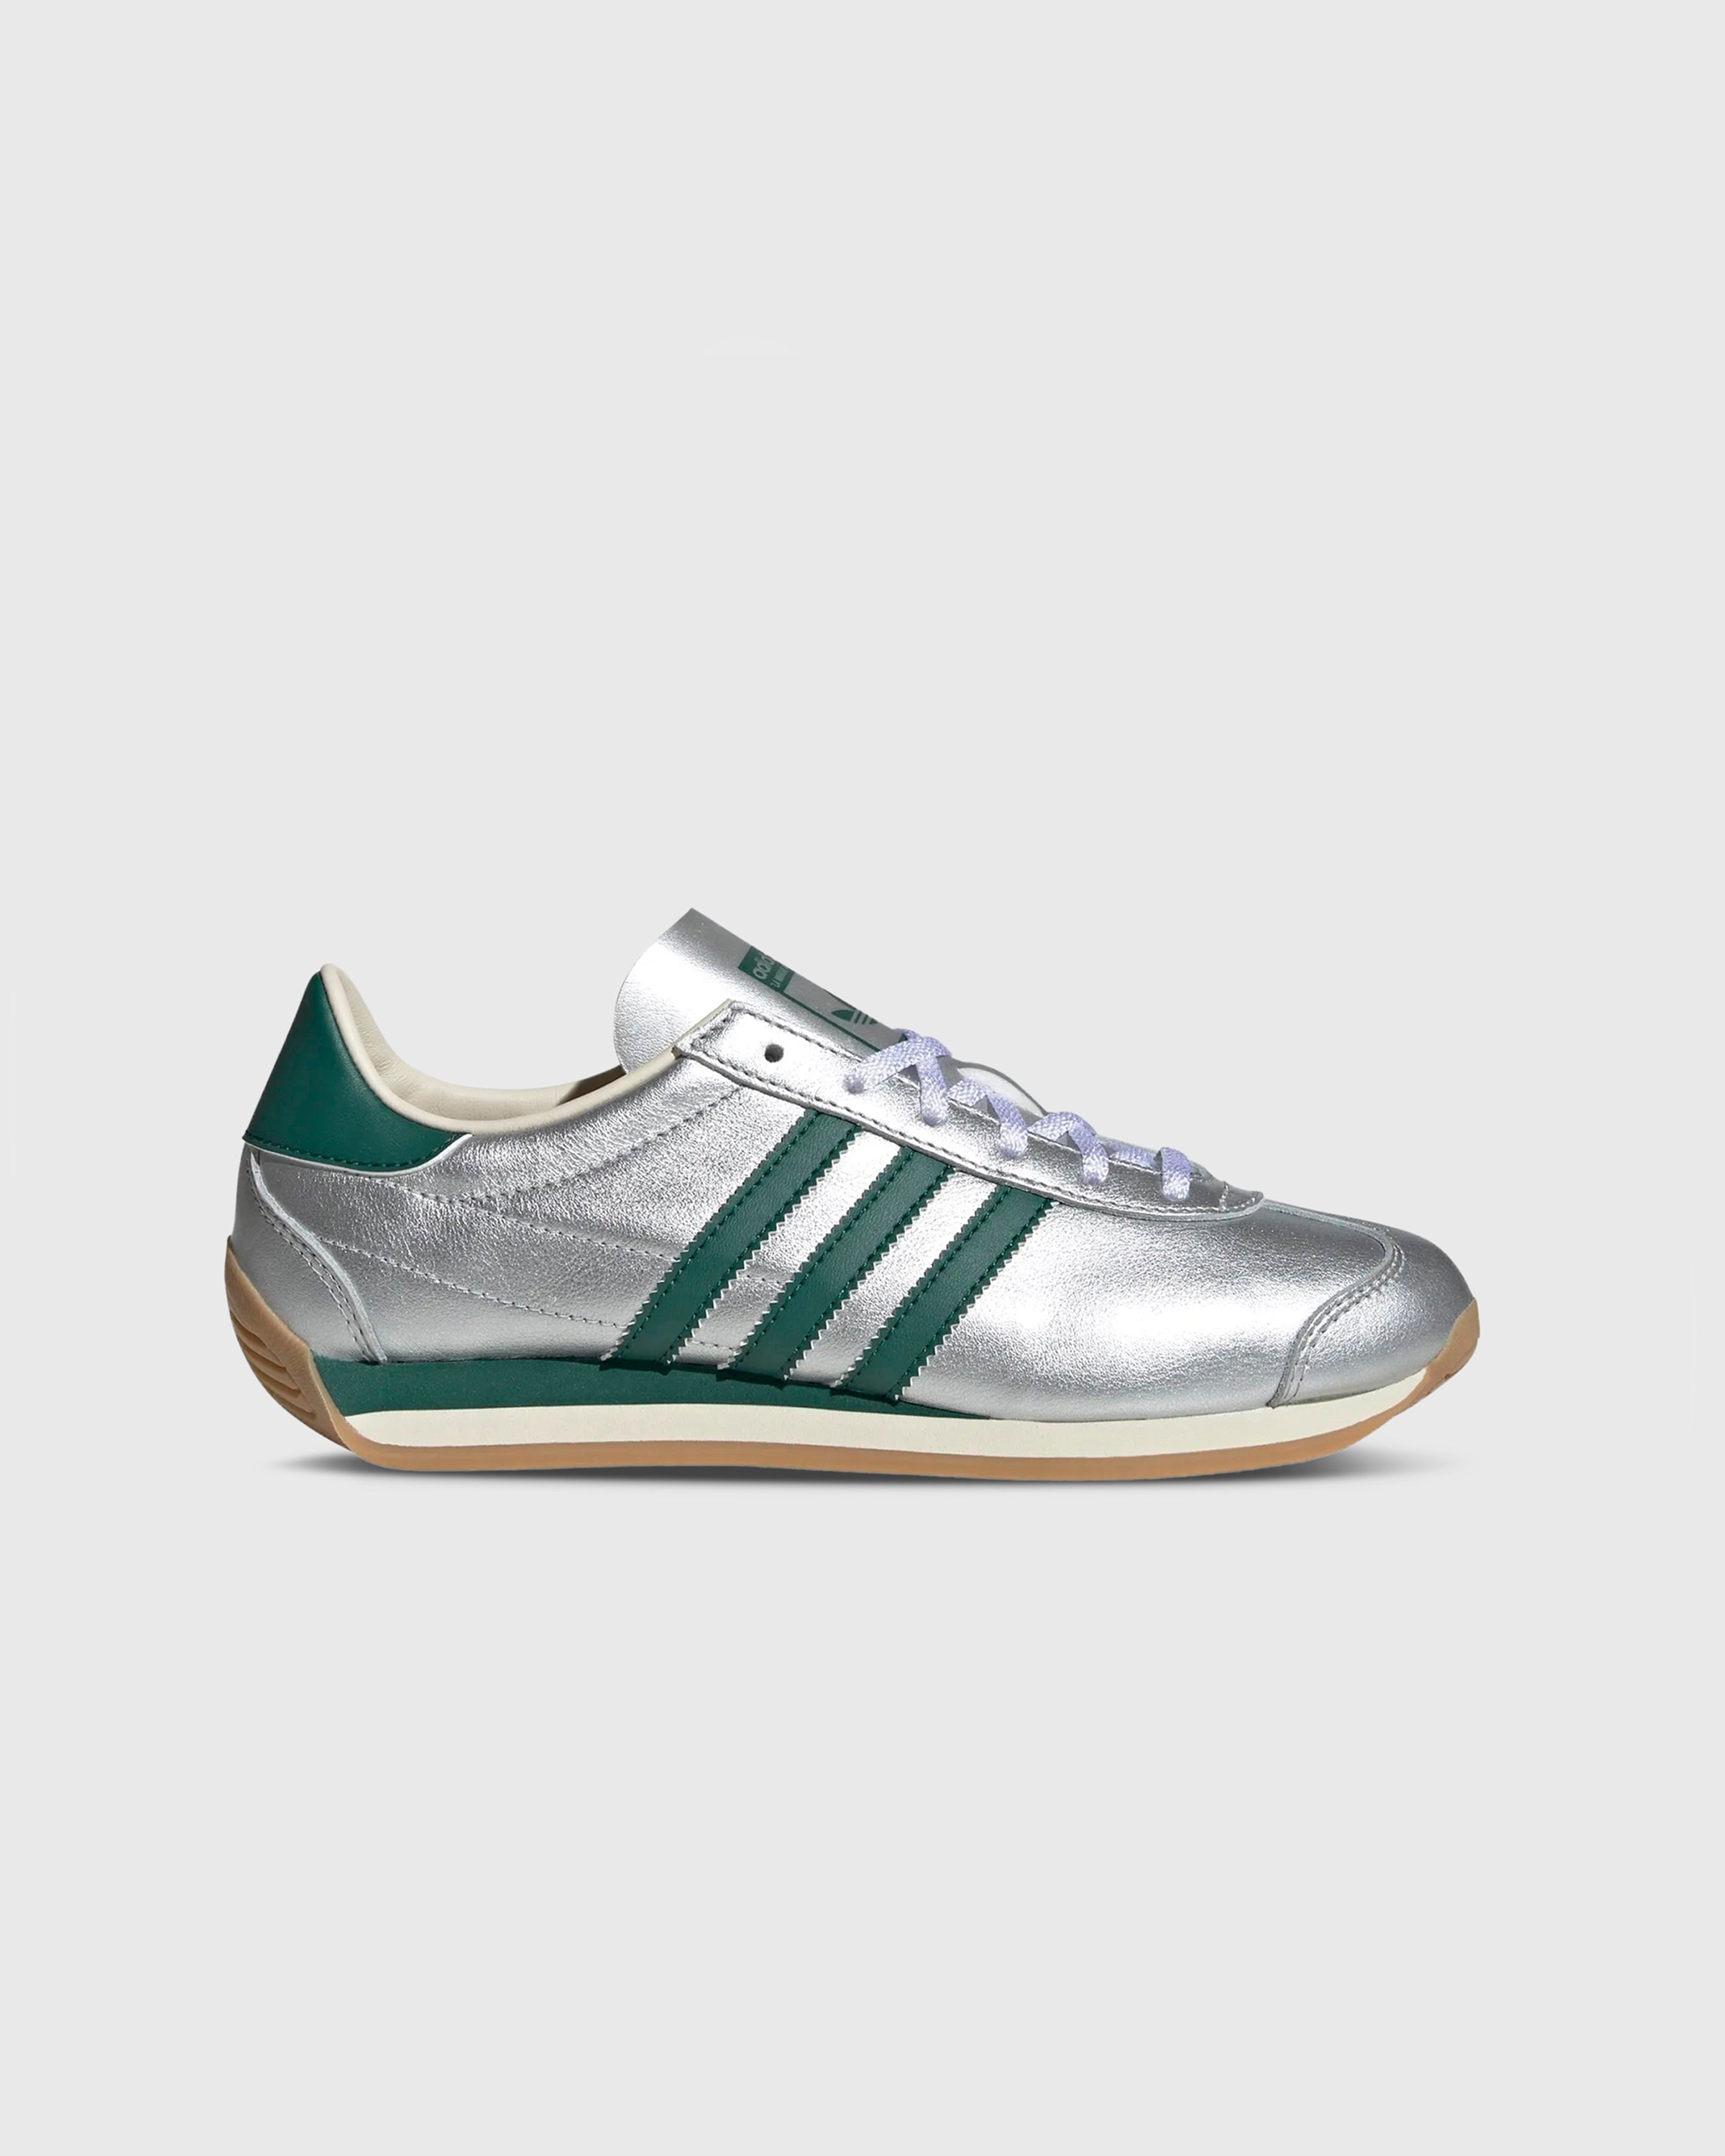 Adidas - COUNTRY OG W        SILVMT/CGREEN/CWHITE - Footwear - Silver - Image 1